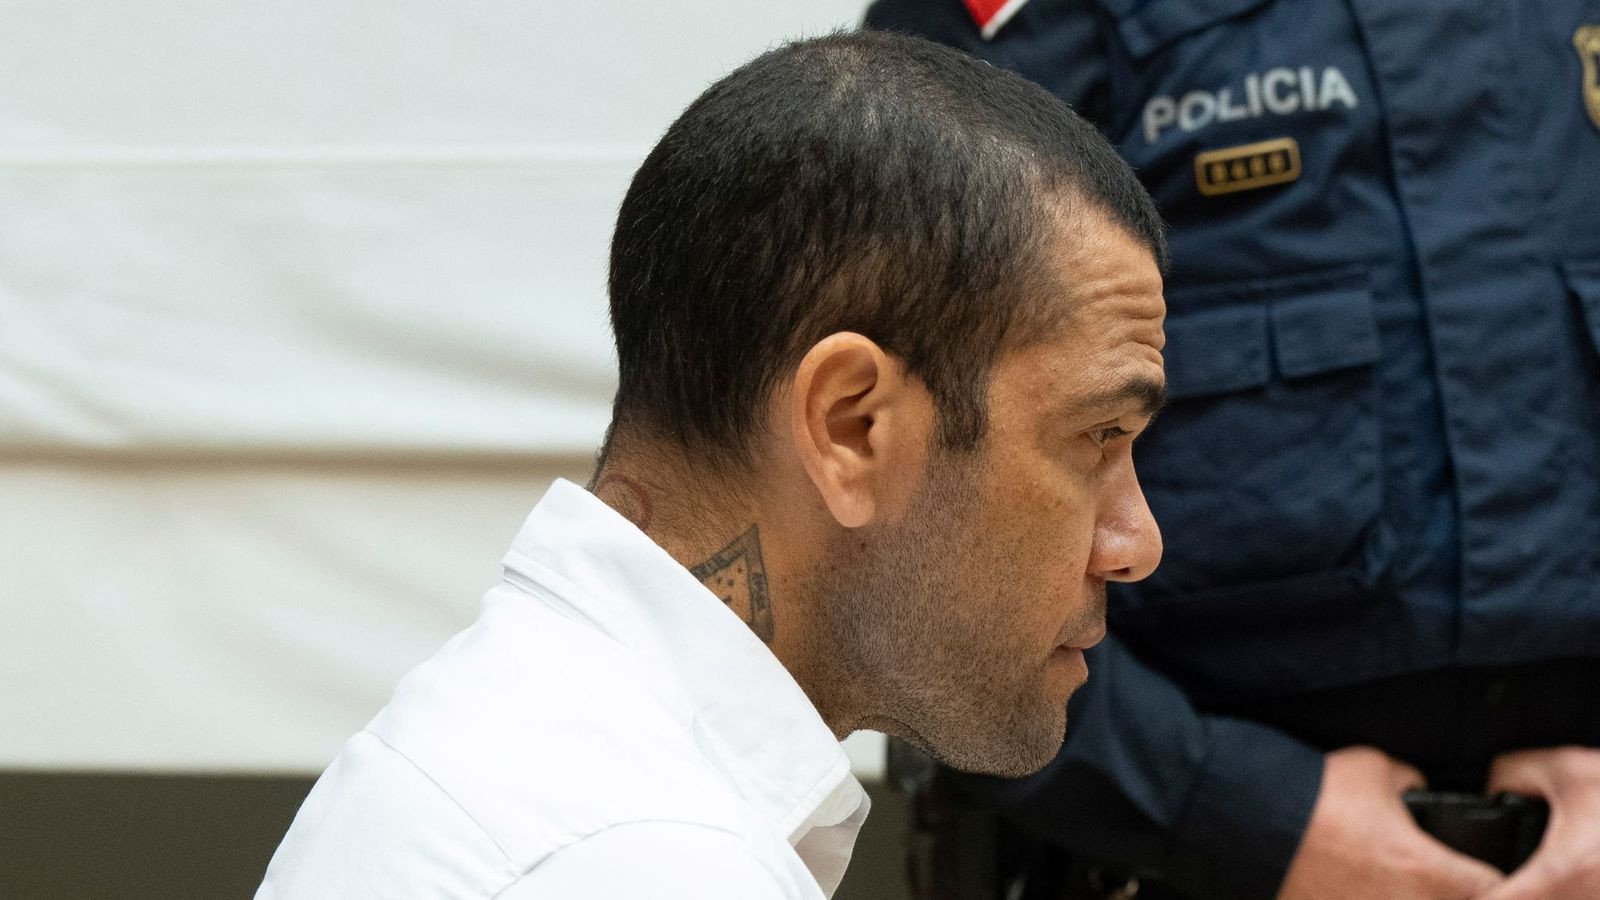 Dani Alves sentenced to 4.5 years in jail for assault | The Express Tribune